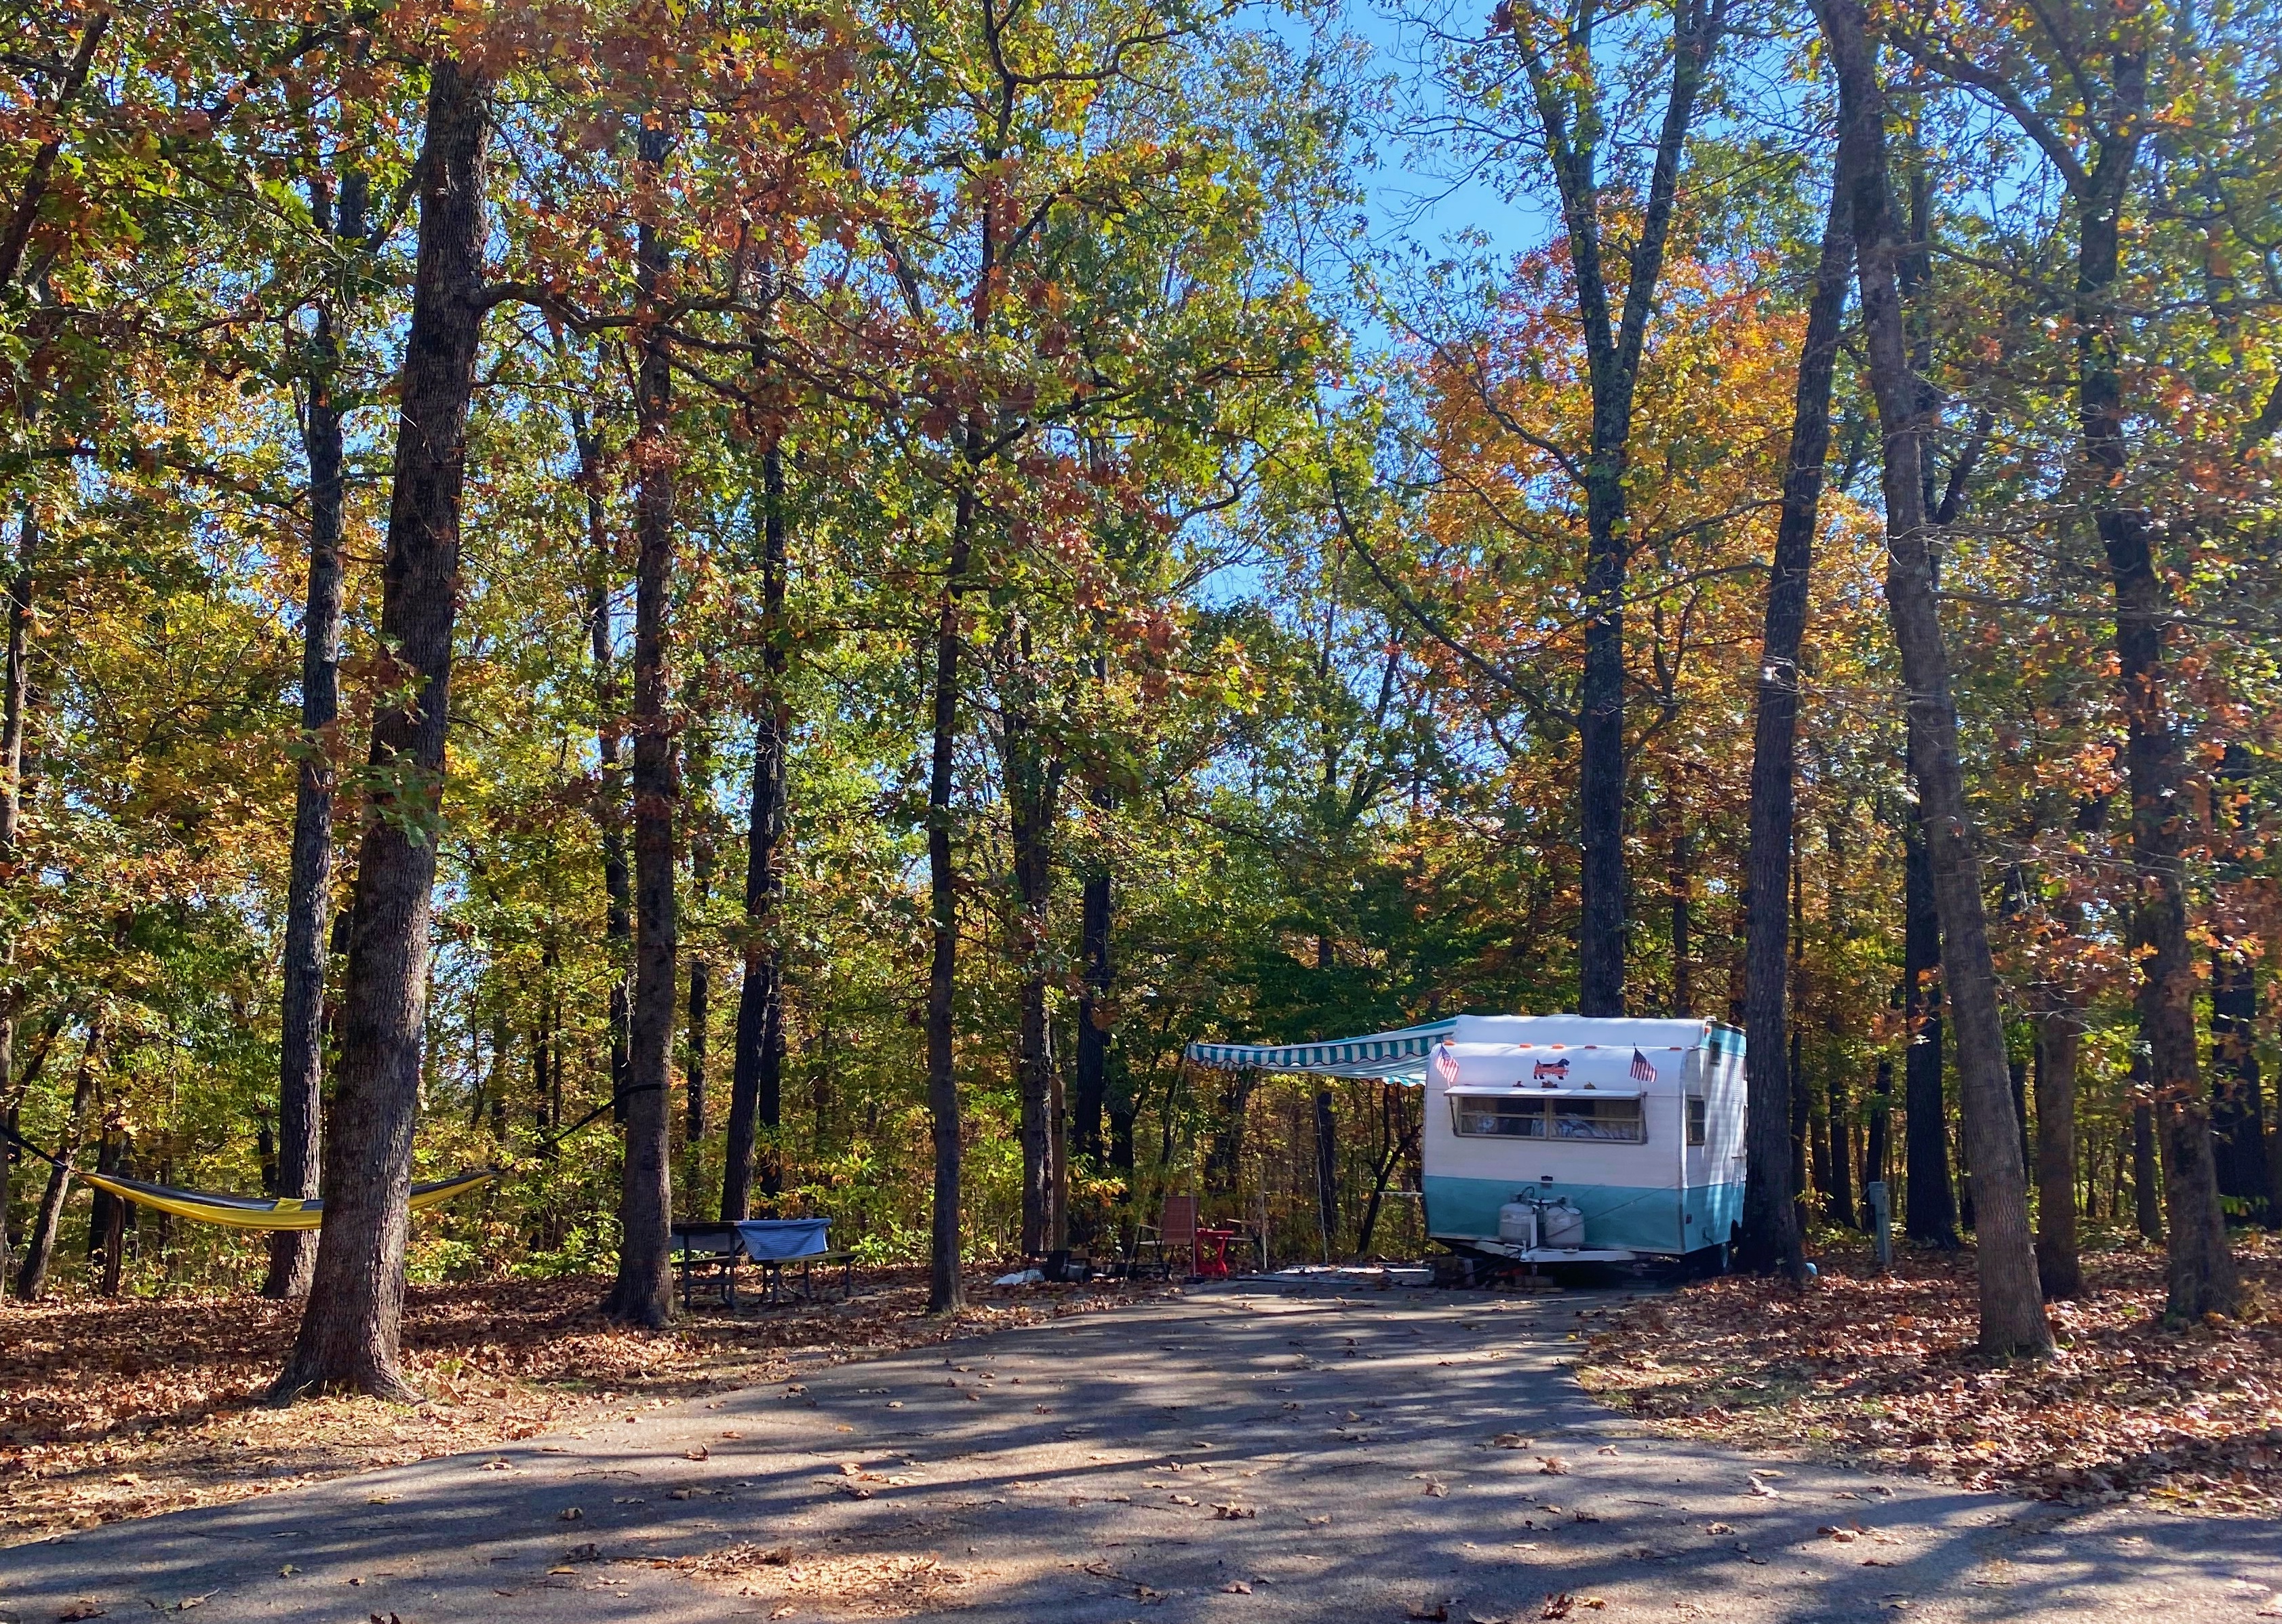  RV camping in the woods in the fall